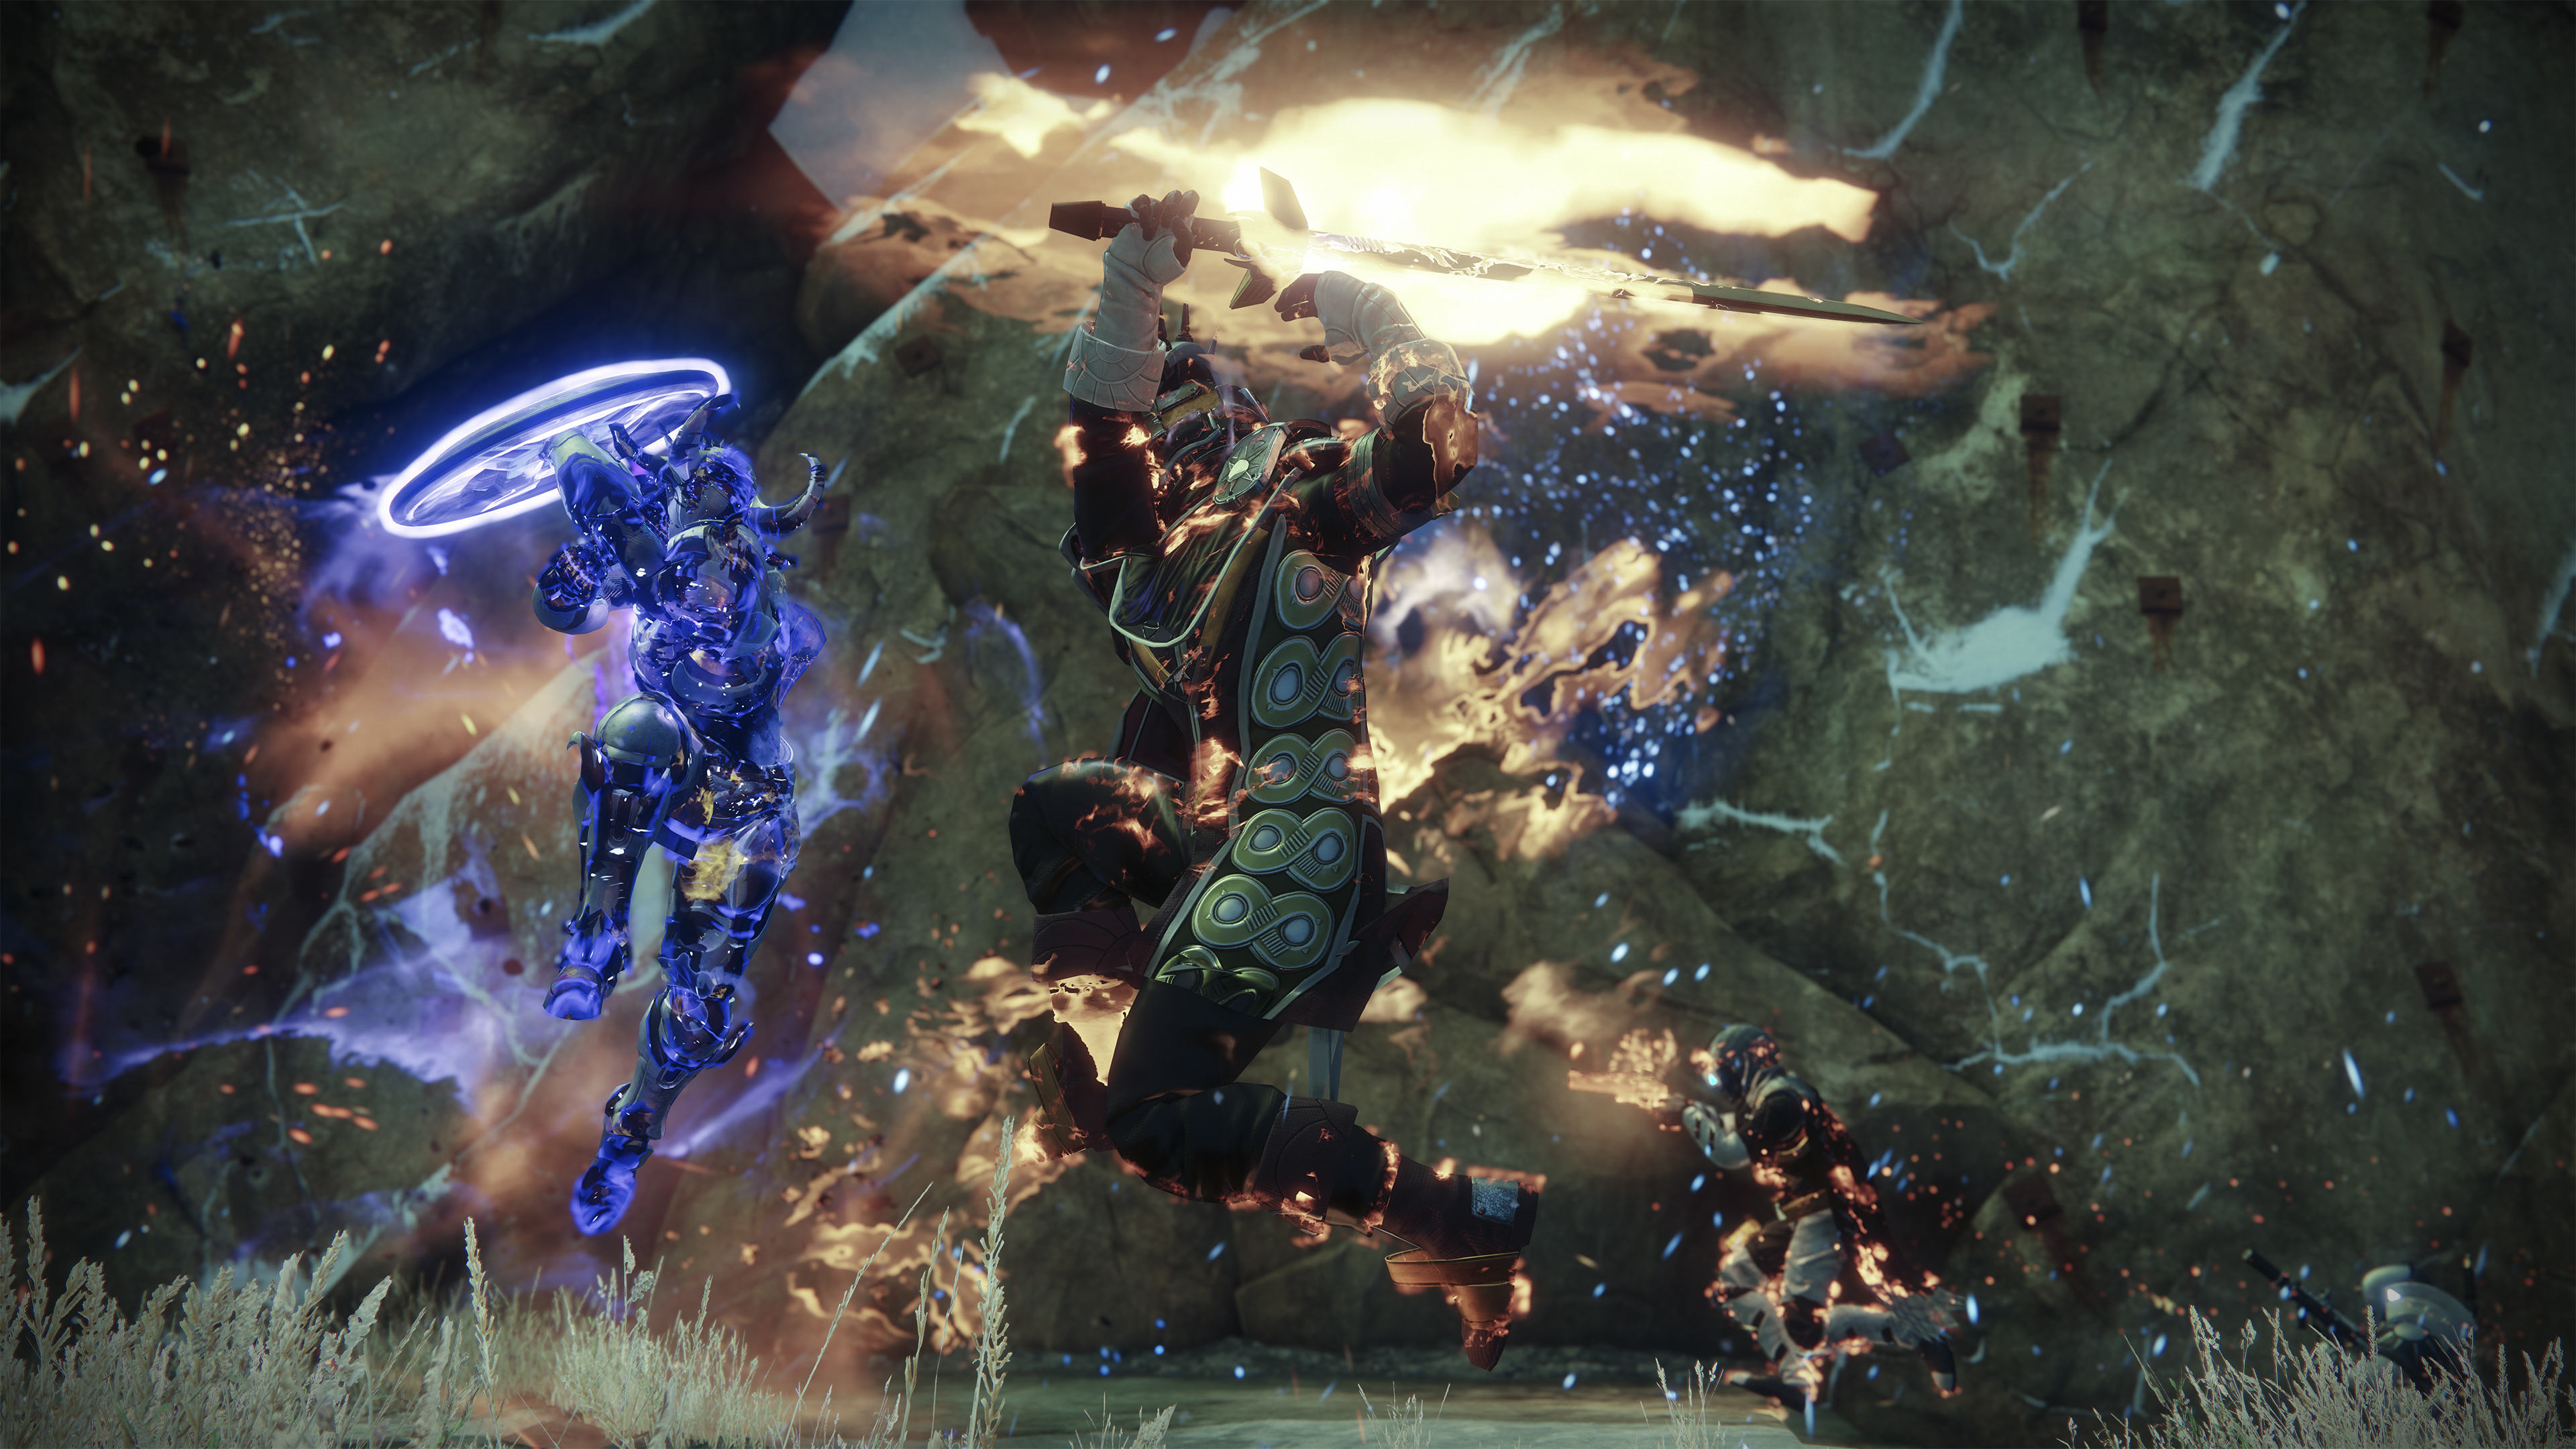 Some Destiny 2 fans are pissed about sliding